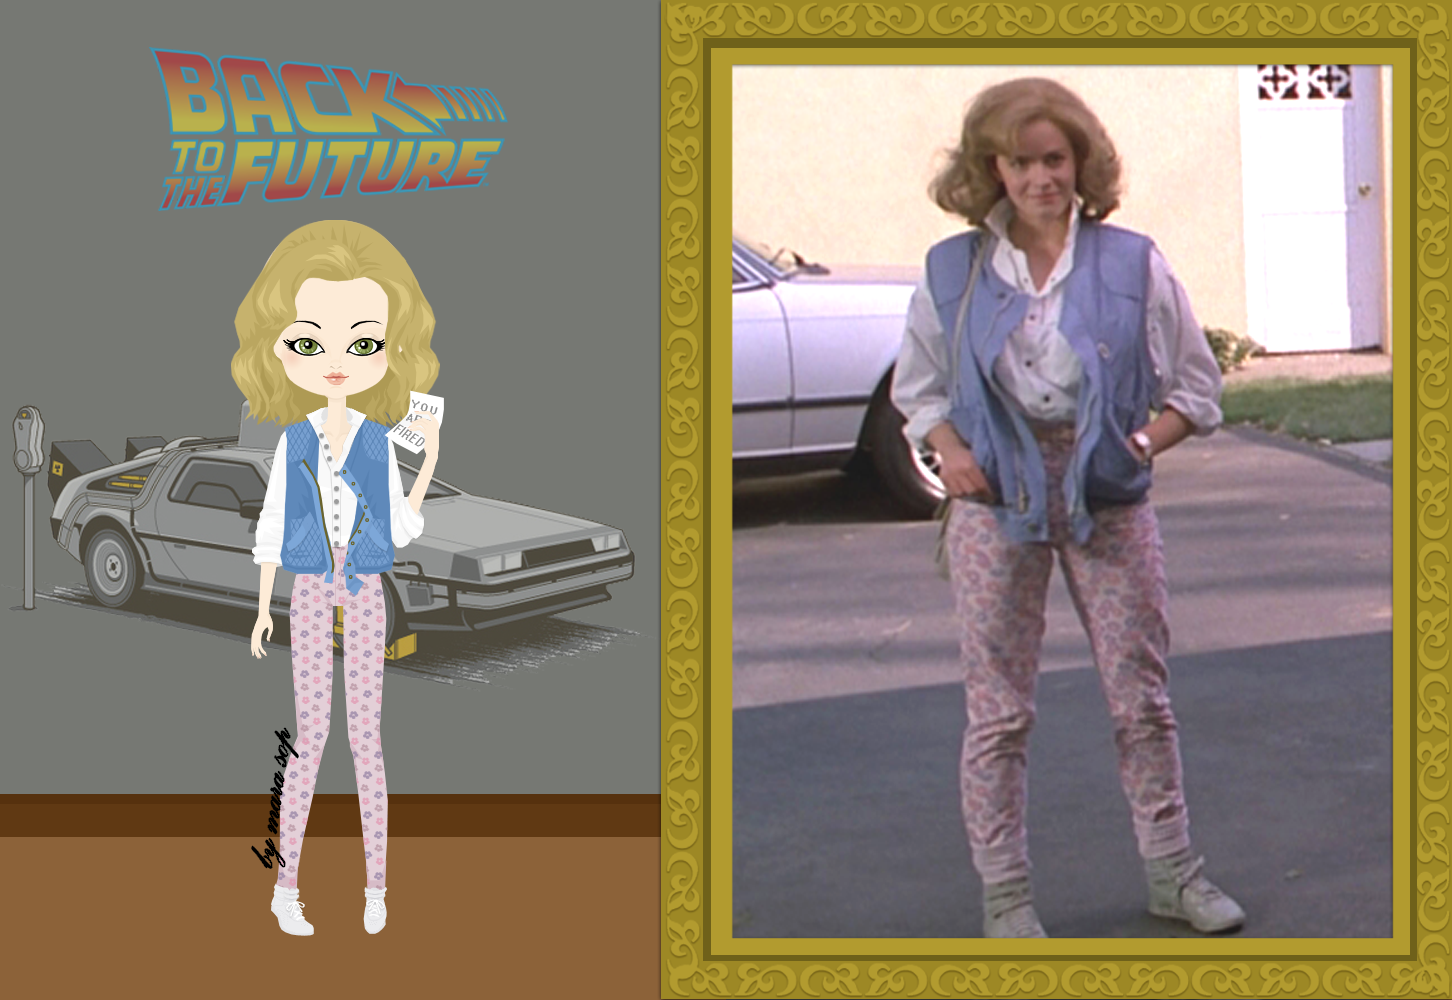 Jennifer Parker, Marty McFly's girlfriend from Back to the Future trylogy. She wears this oufit on the 3 movies, since her p. Trendy halloween, Marty mcfly, Mcfly